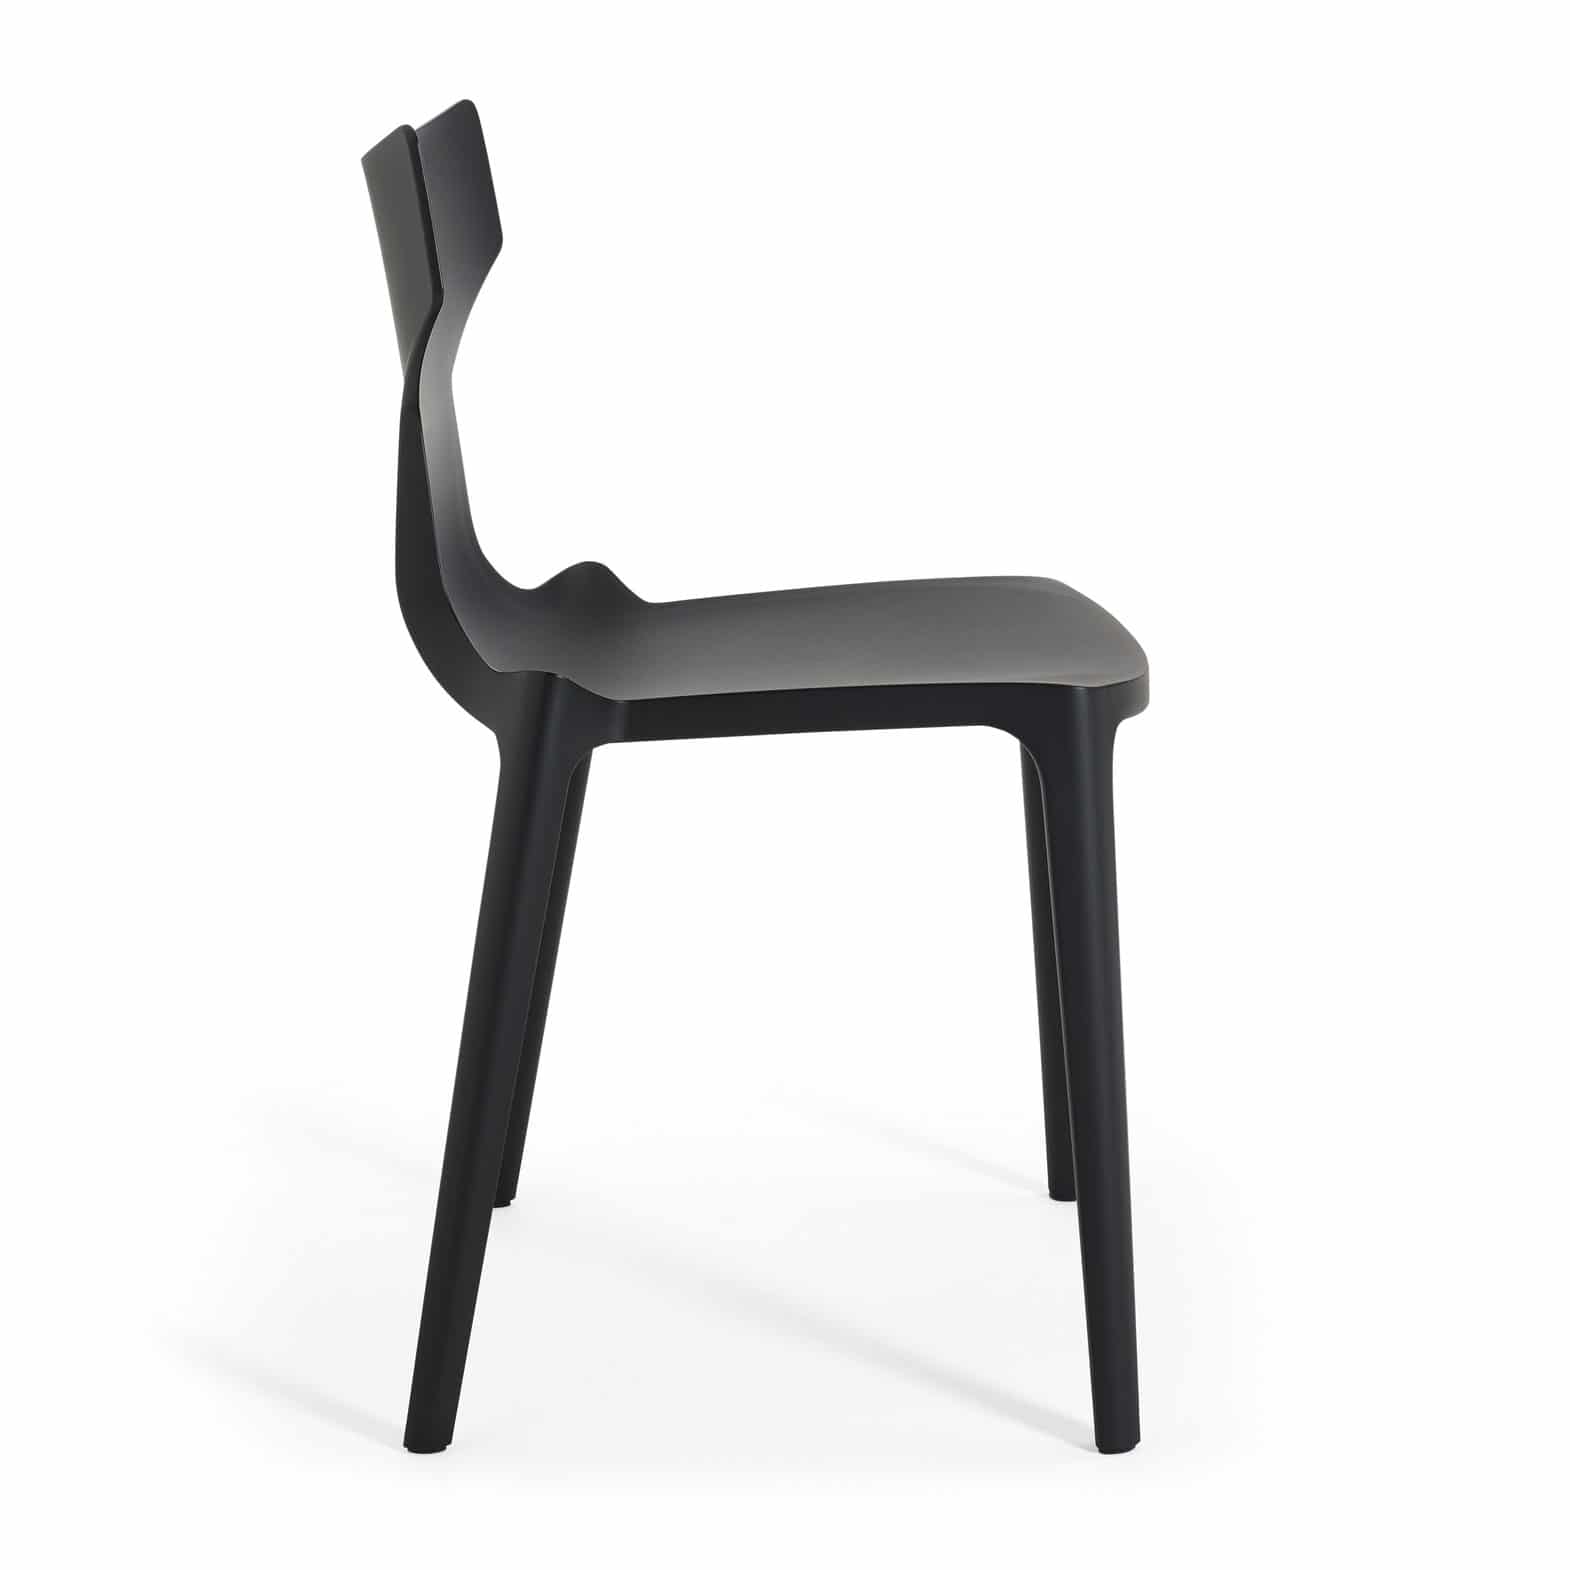 RE CHAIR